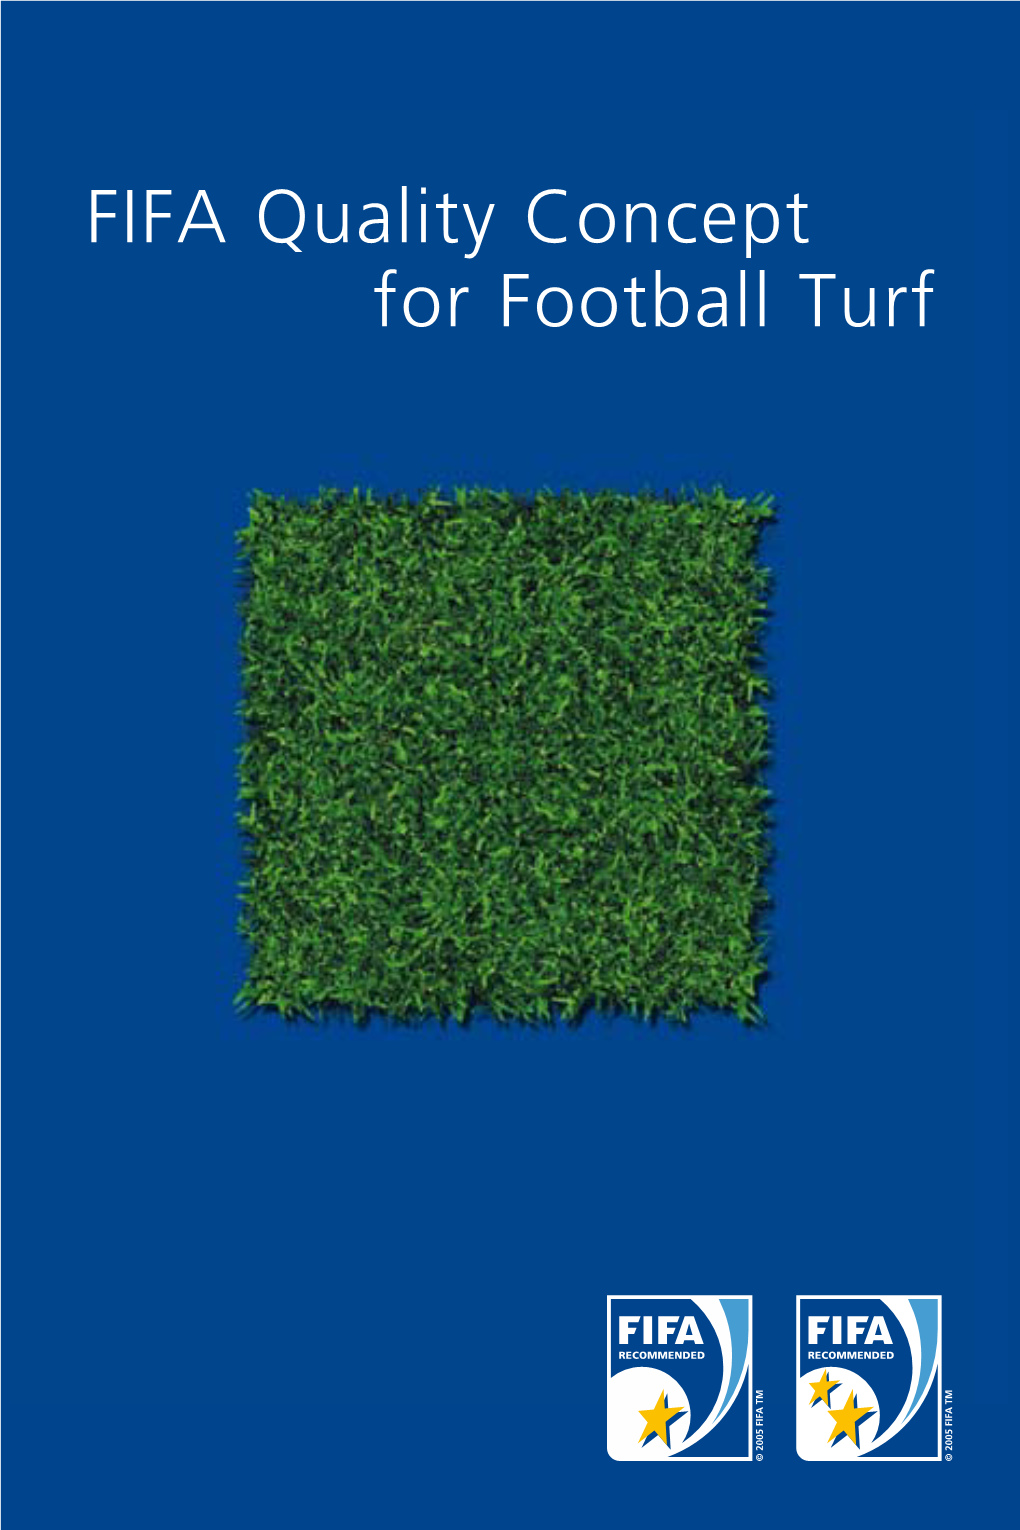 FIFA Quality Concept for Football Turf FIFA, World Football’S Governing Body, Has Been Concerned with Ensuring the Quality of Football Turf Since 2001